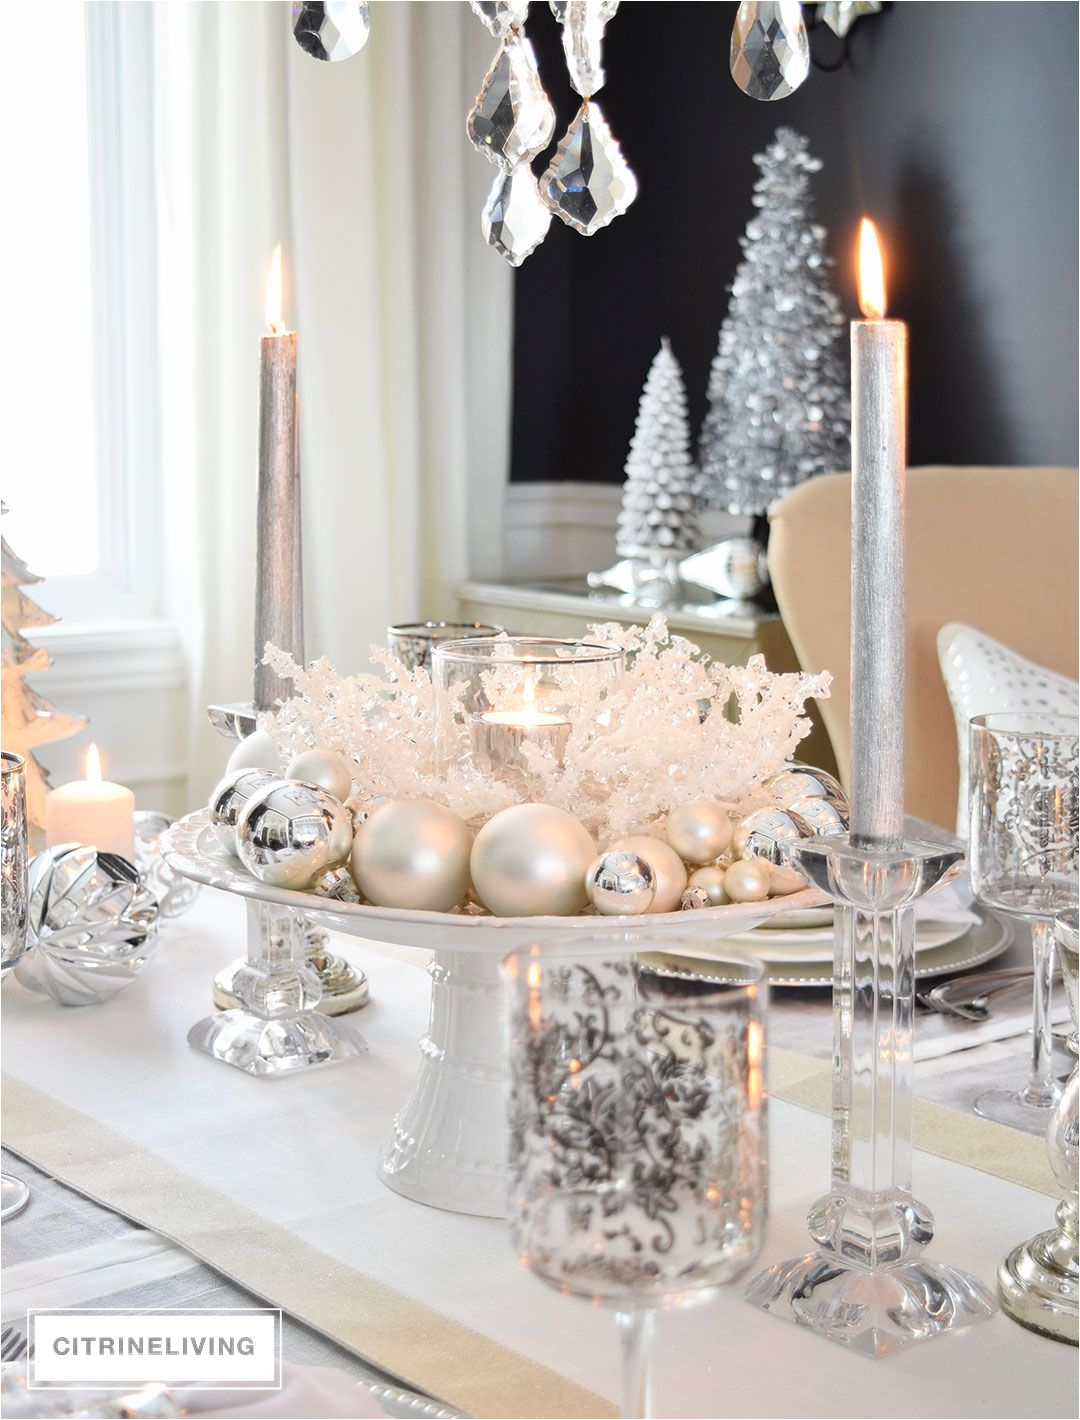 crisp whites and cool metallics are layered together for a fresh winter wonderland inspired holiday tablescape for christmas or new year s